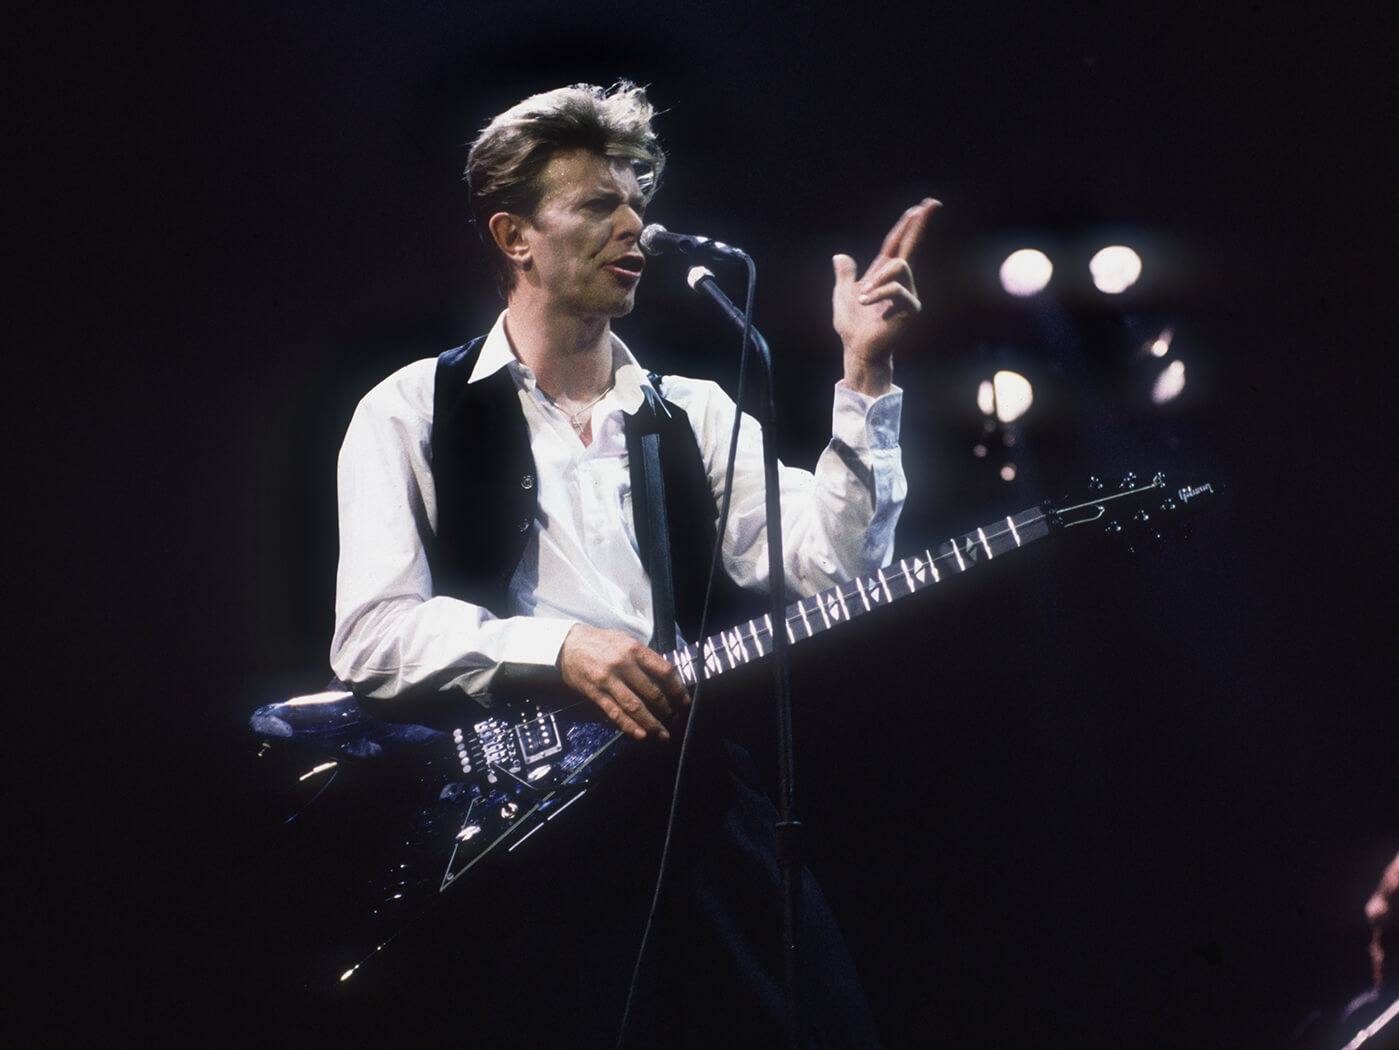 David Bowie on stage with flying v guitar